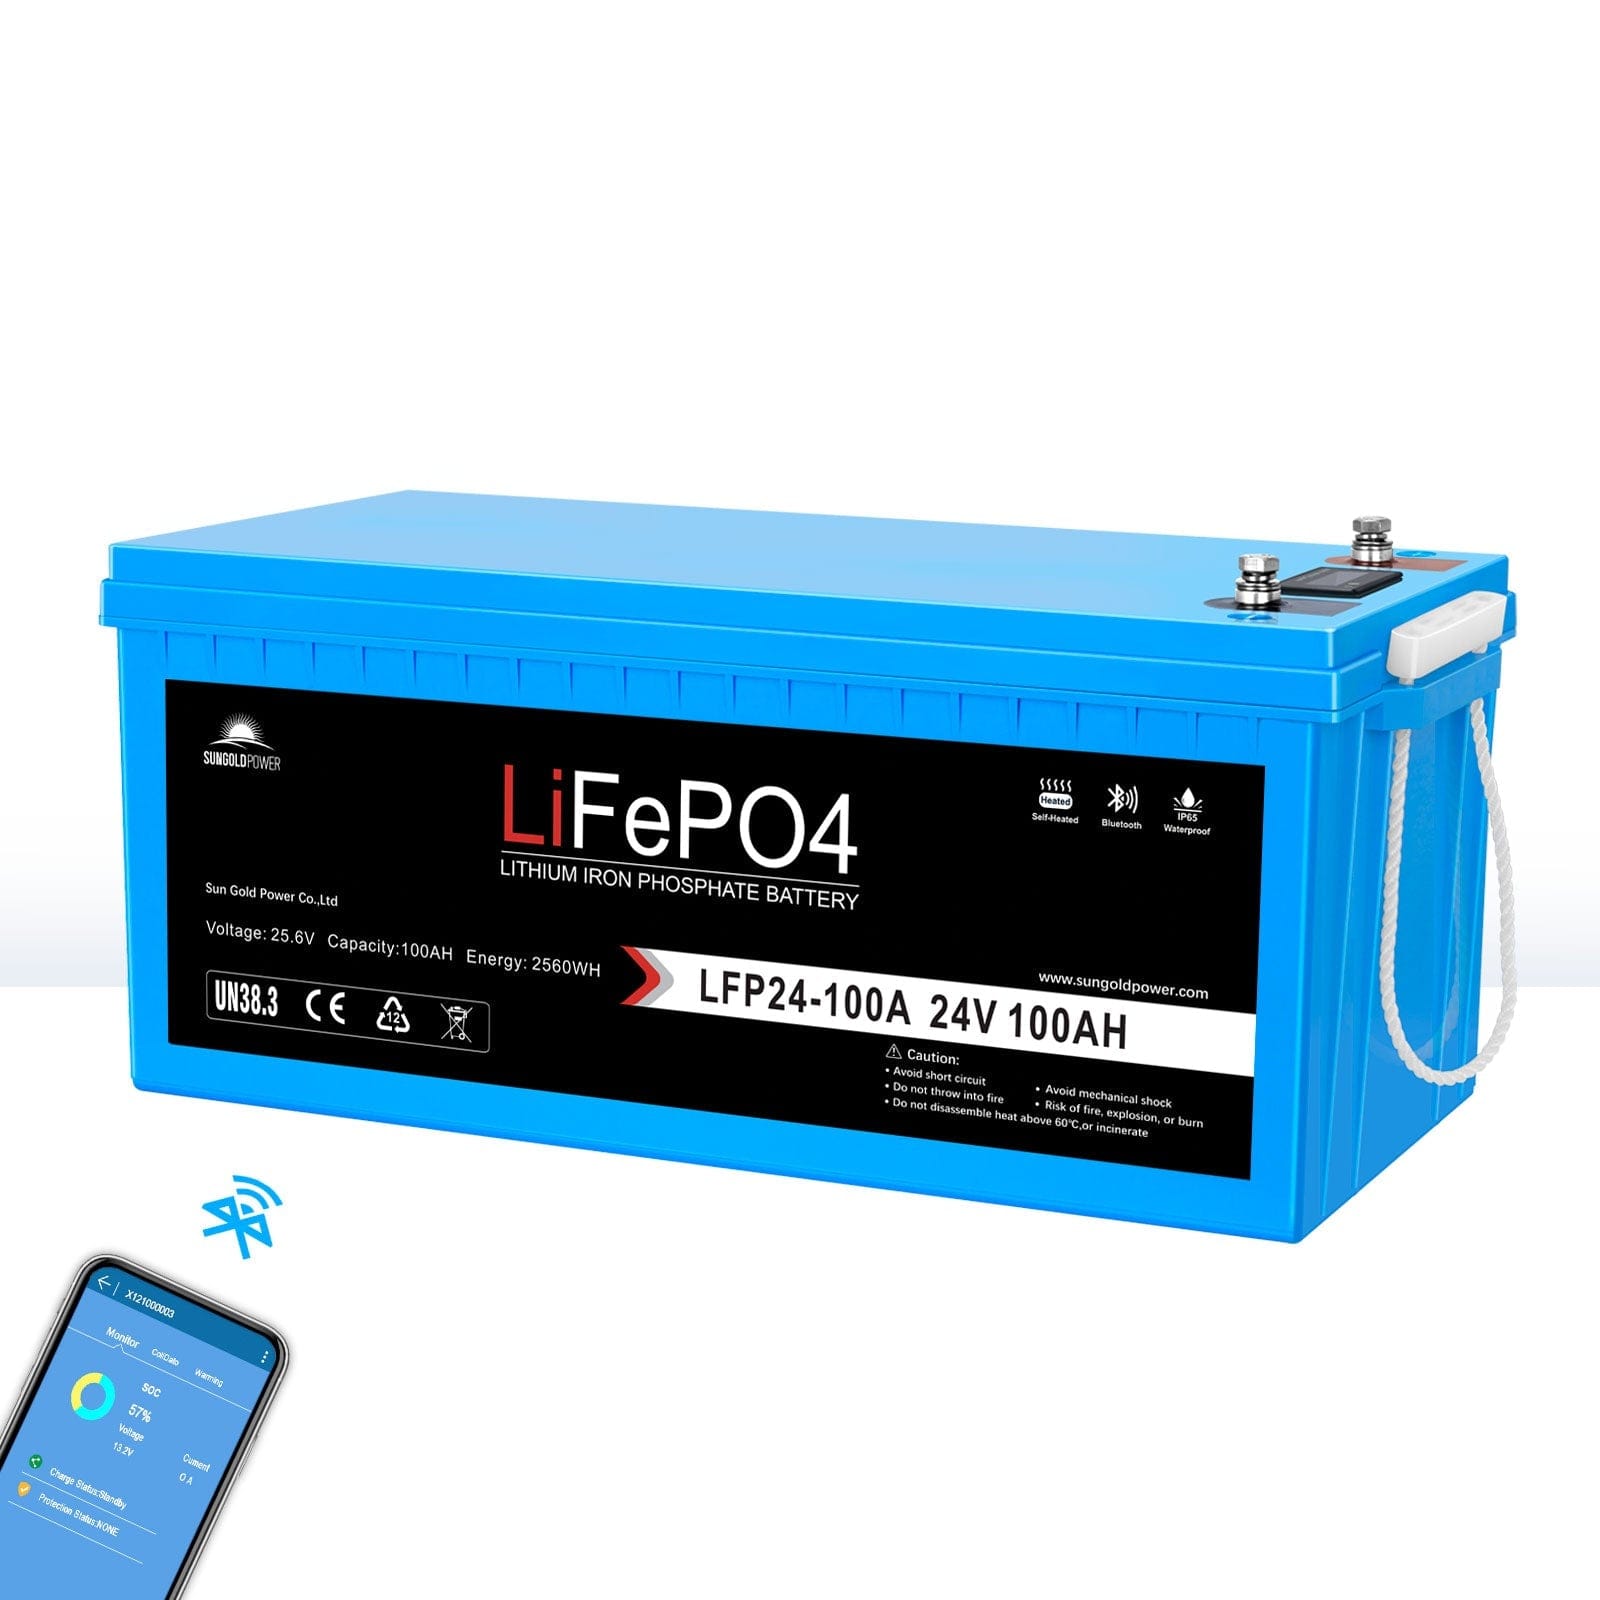 24V 100Ah LiFePo4 Deep Cycle Lithium Battery Bluetooth / Self-Heating / IP65 SunGoldPower Battery